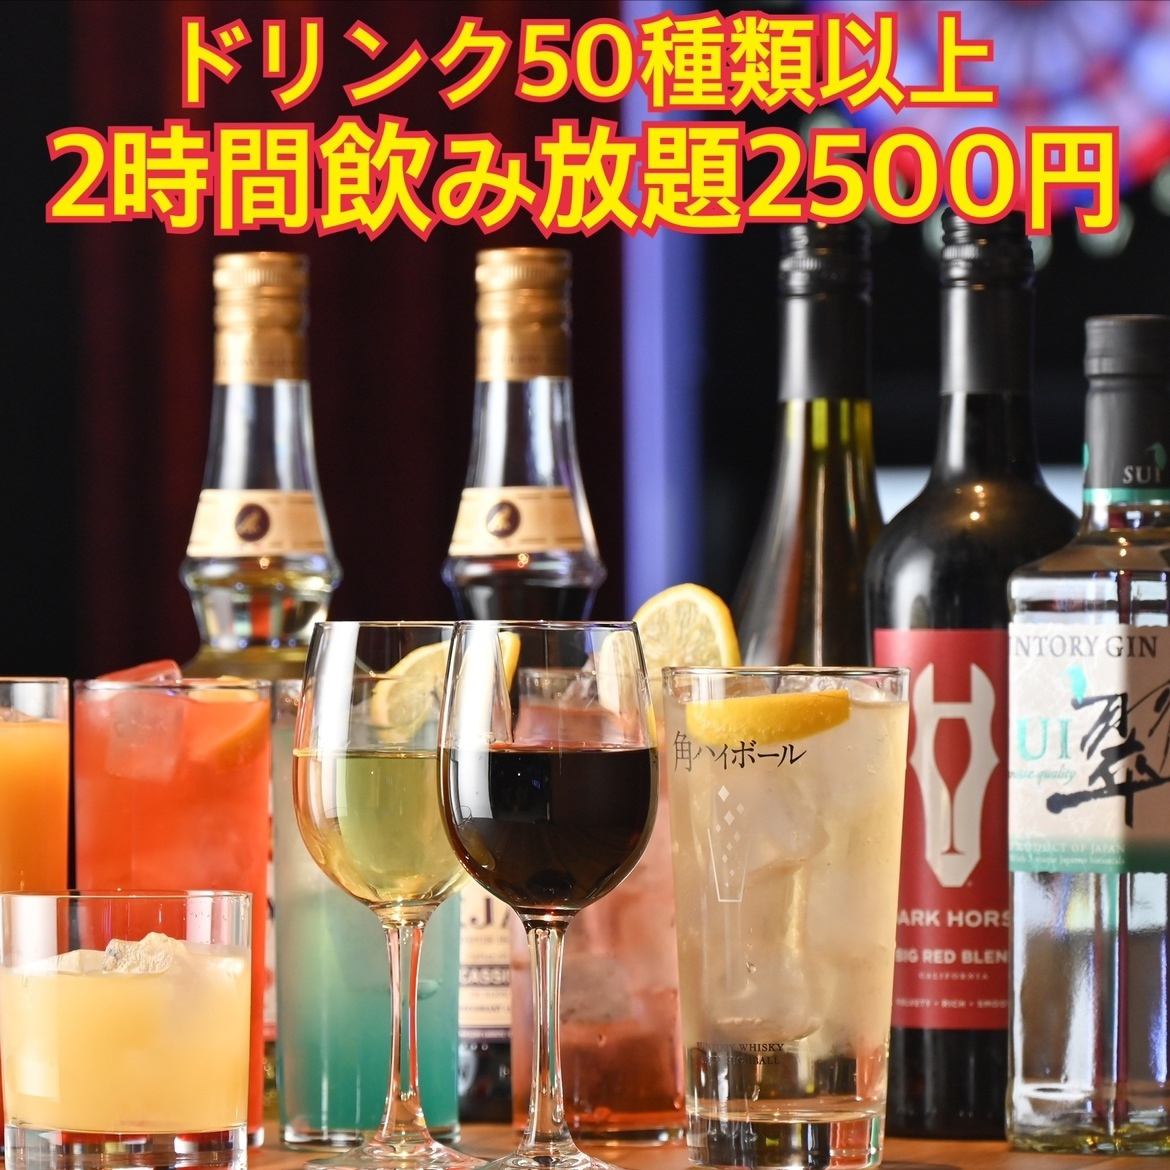 All-you-can-drink for 2 hours starts at 2,500 yen★Please use this for your second or third party!